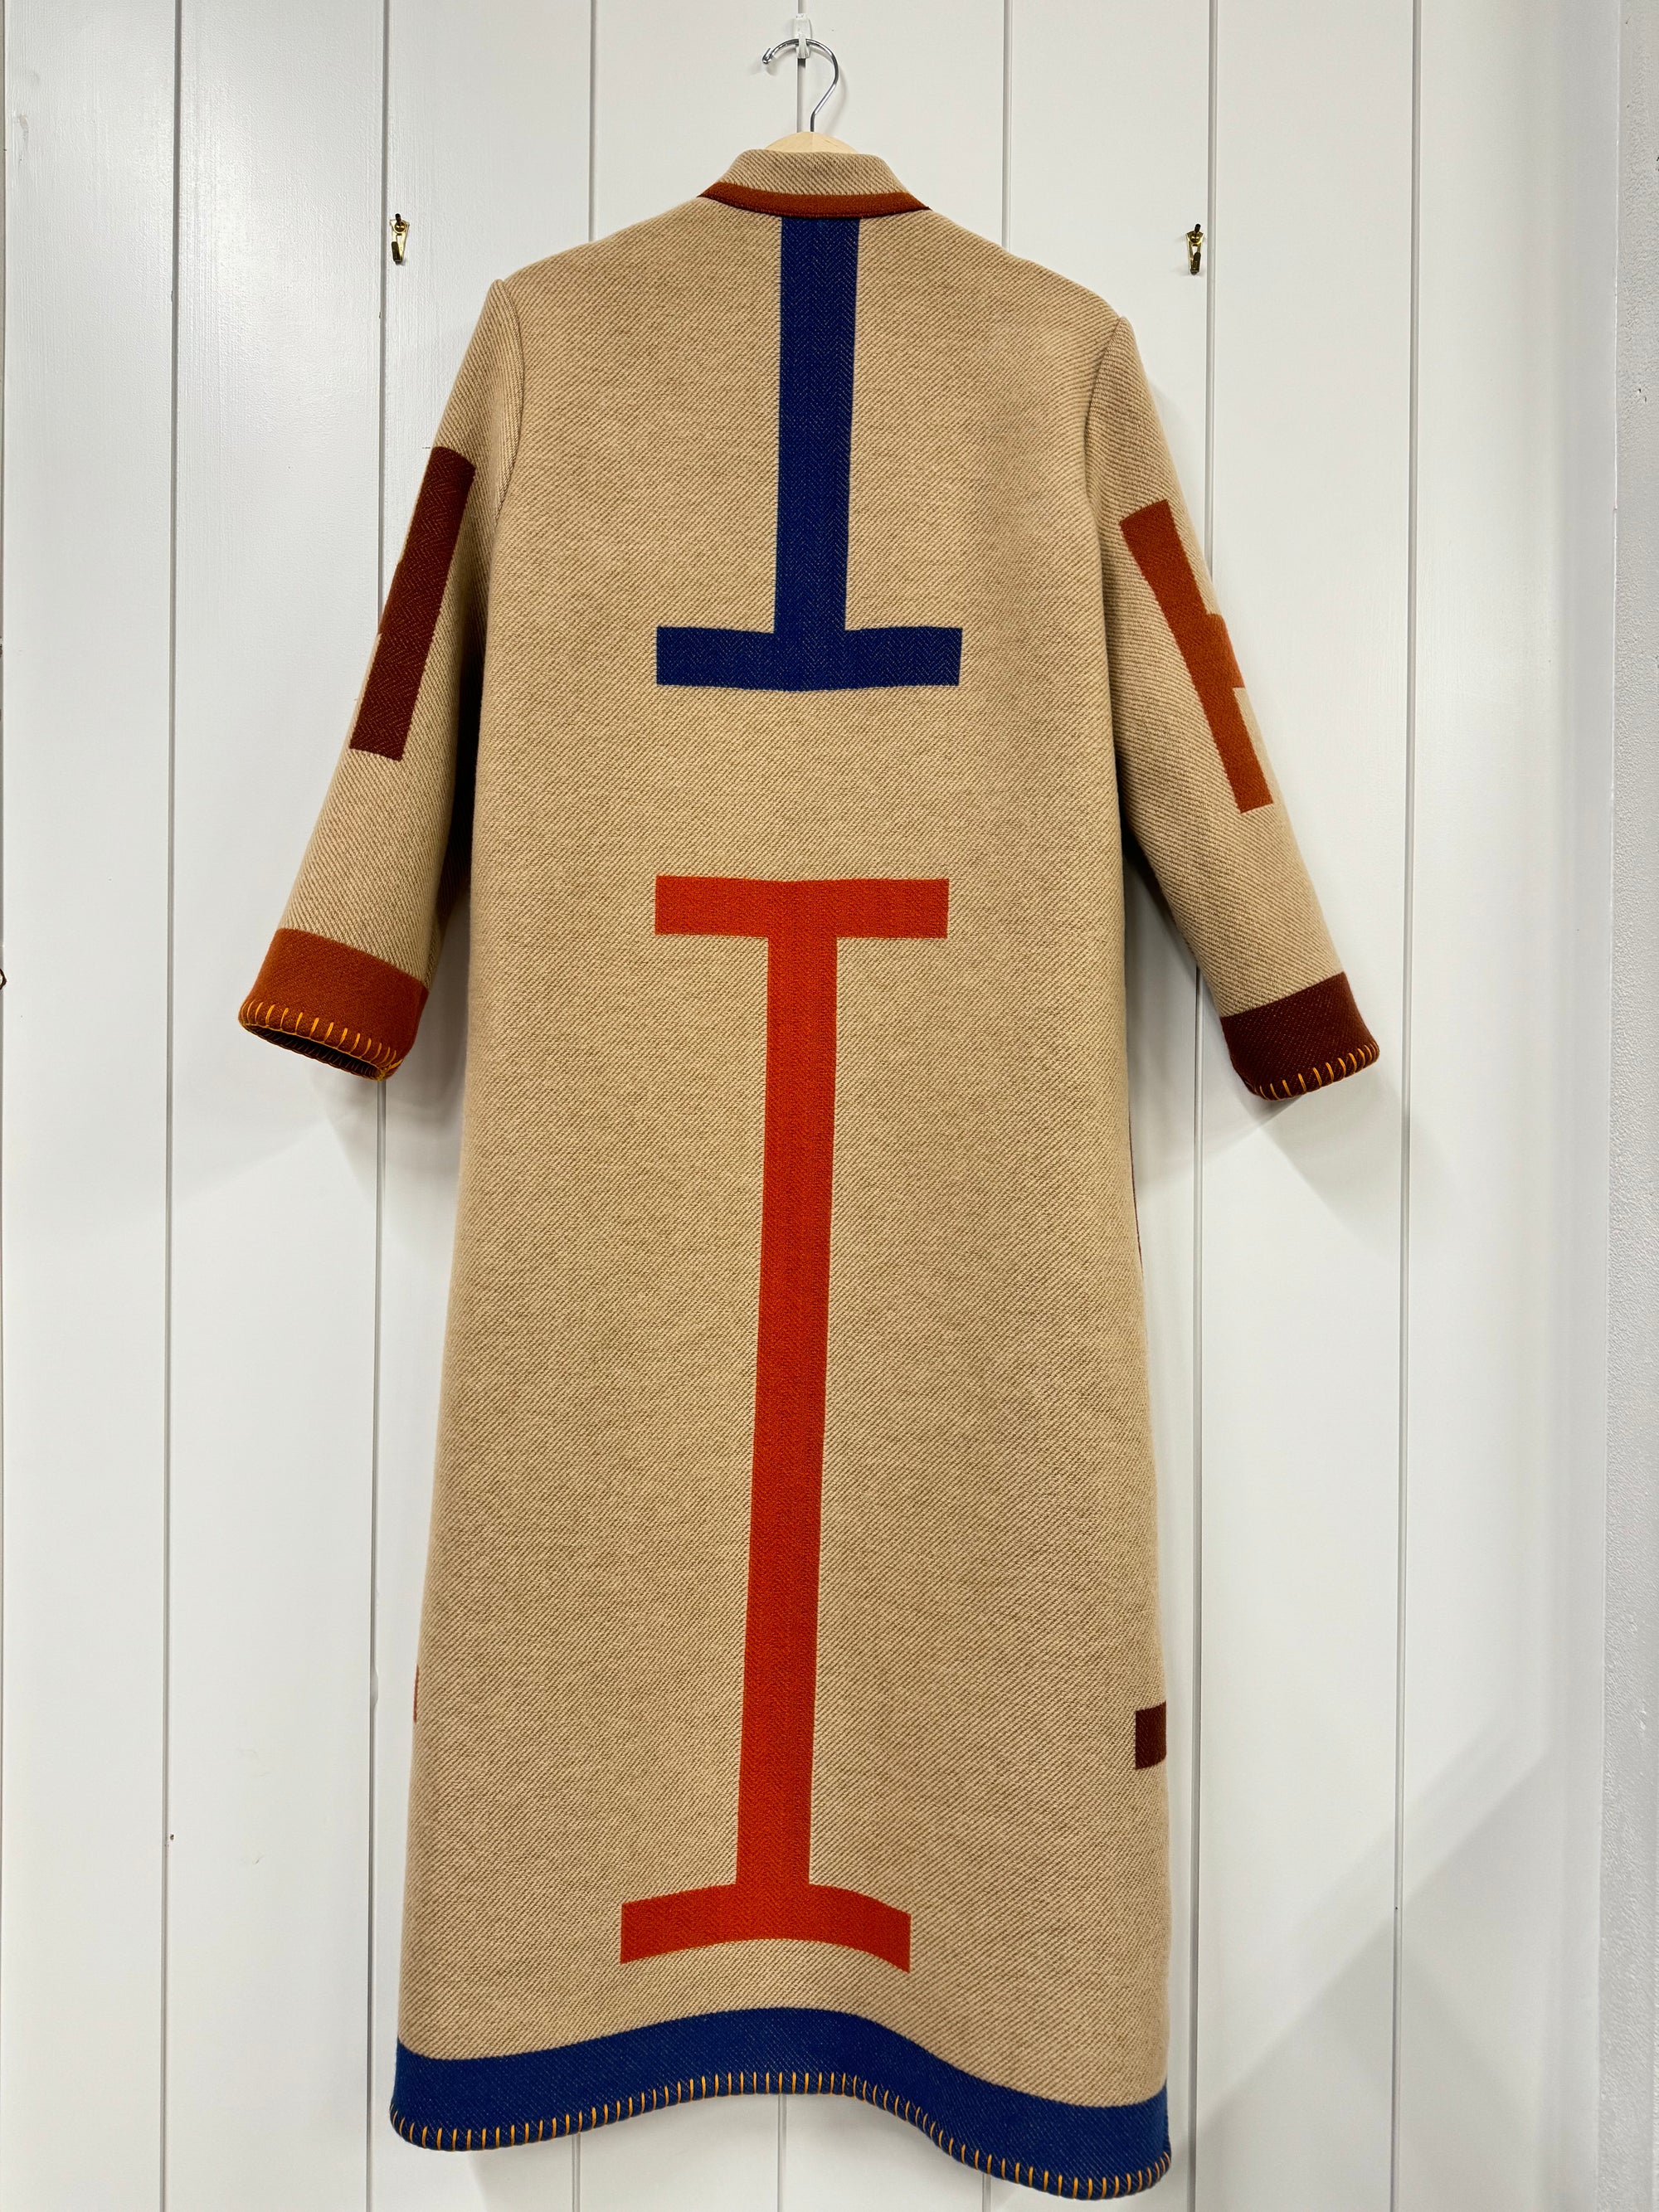 The Linear Coat